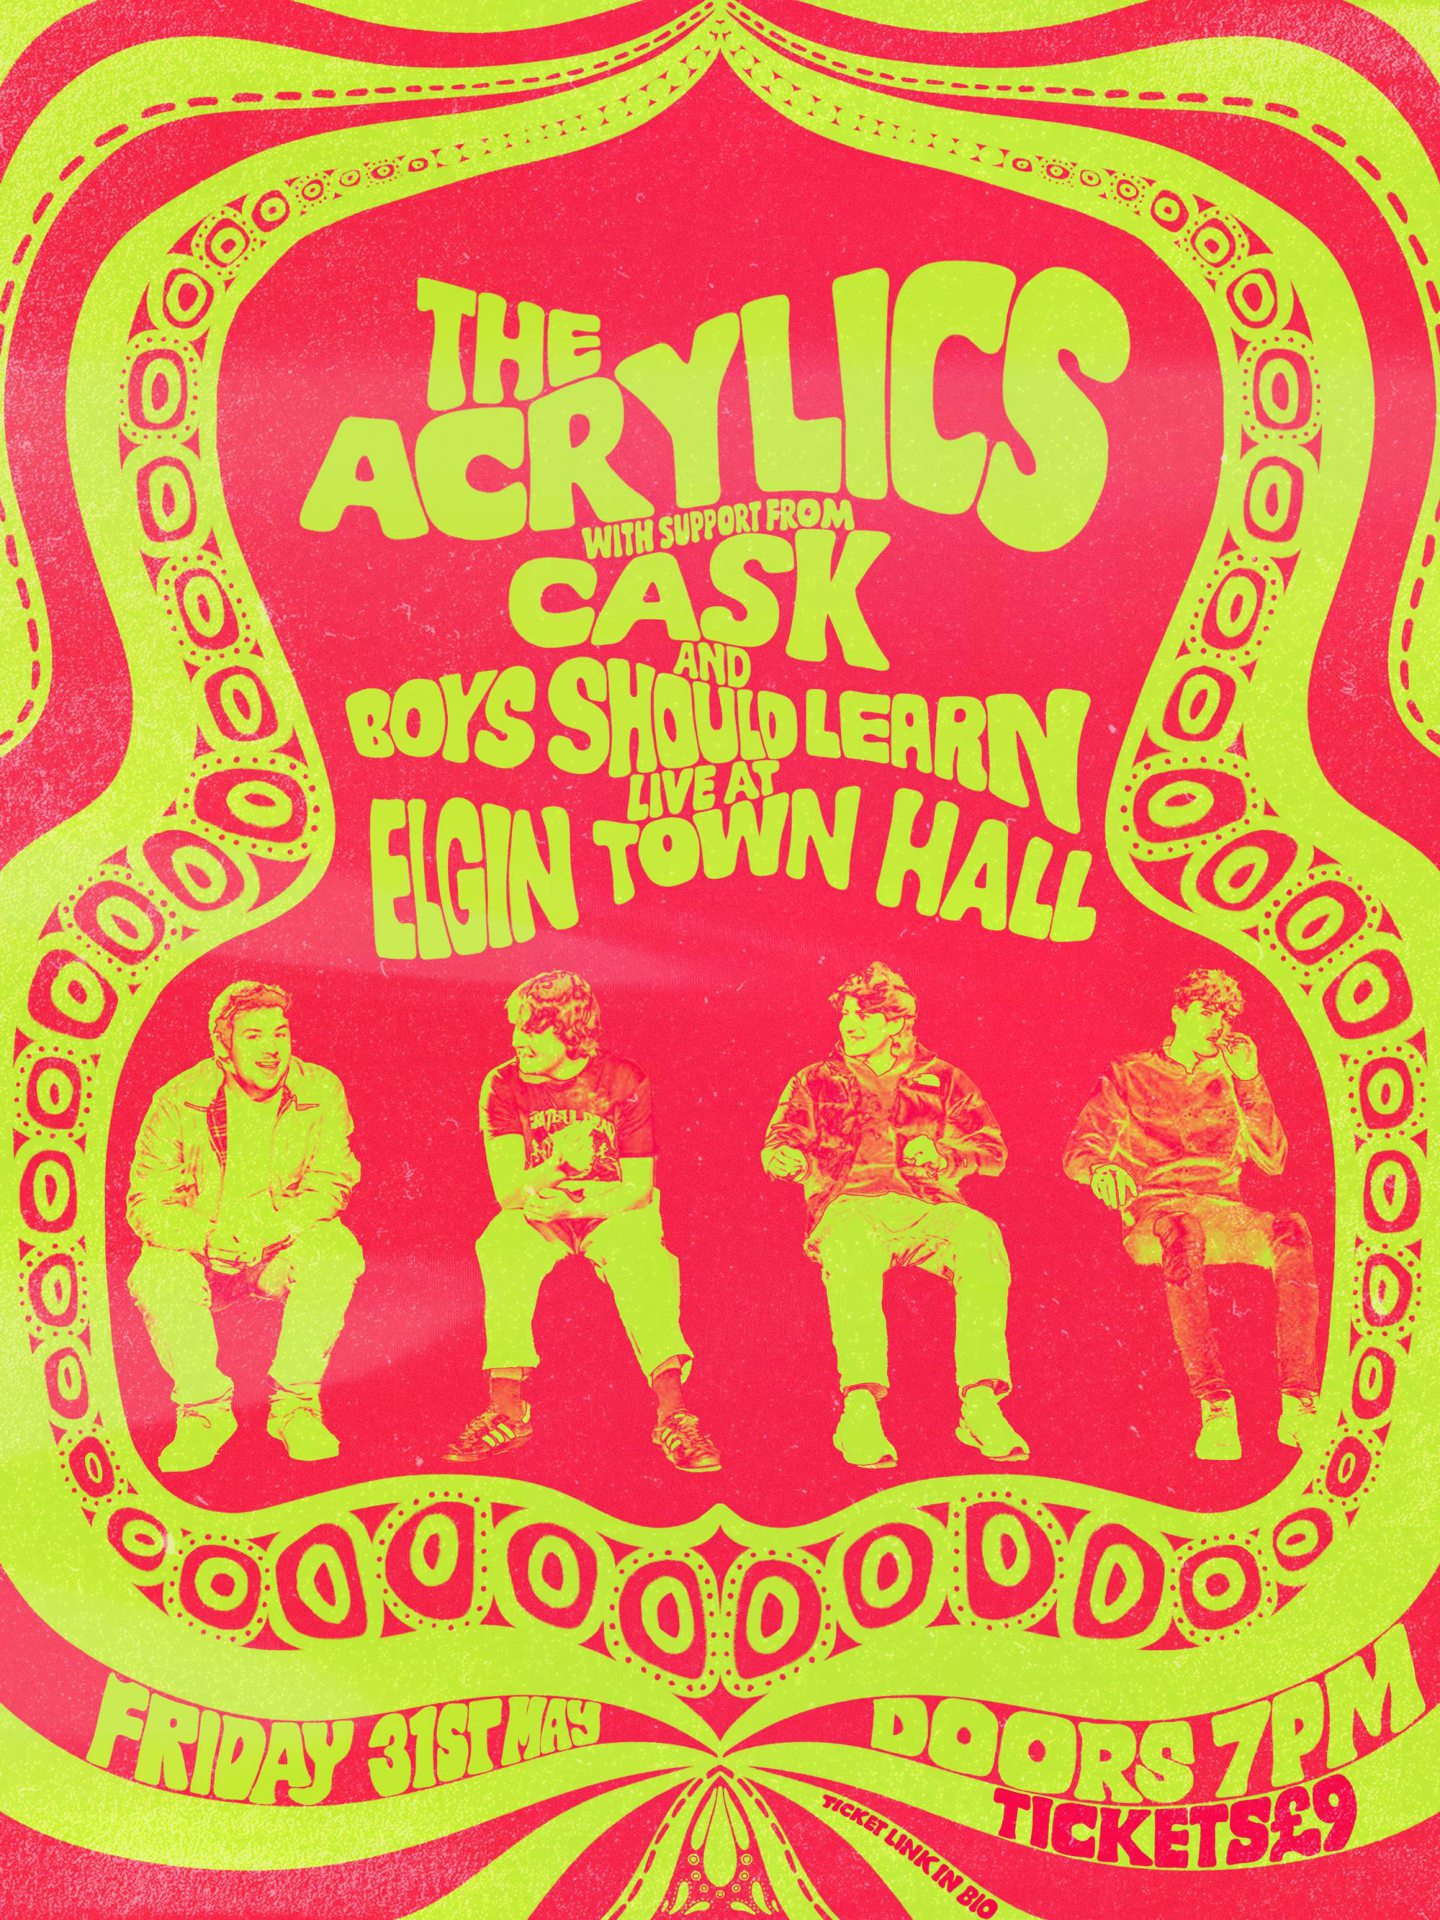 The flier for The Acrylics headline show at Elgin Town Hall. Image supplied by The Acrylics